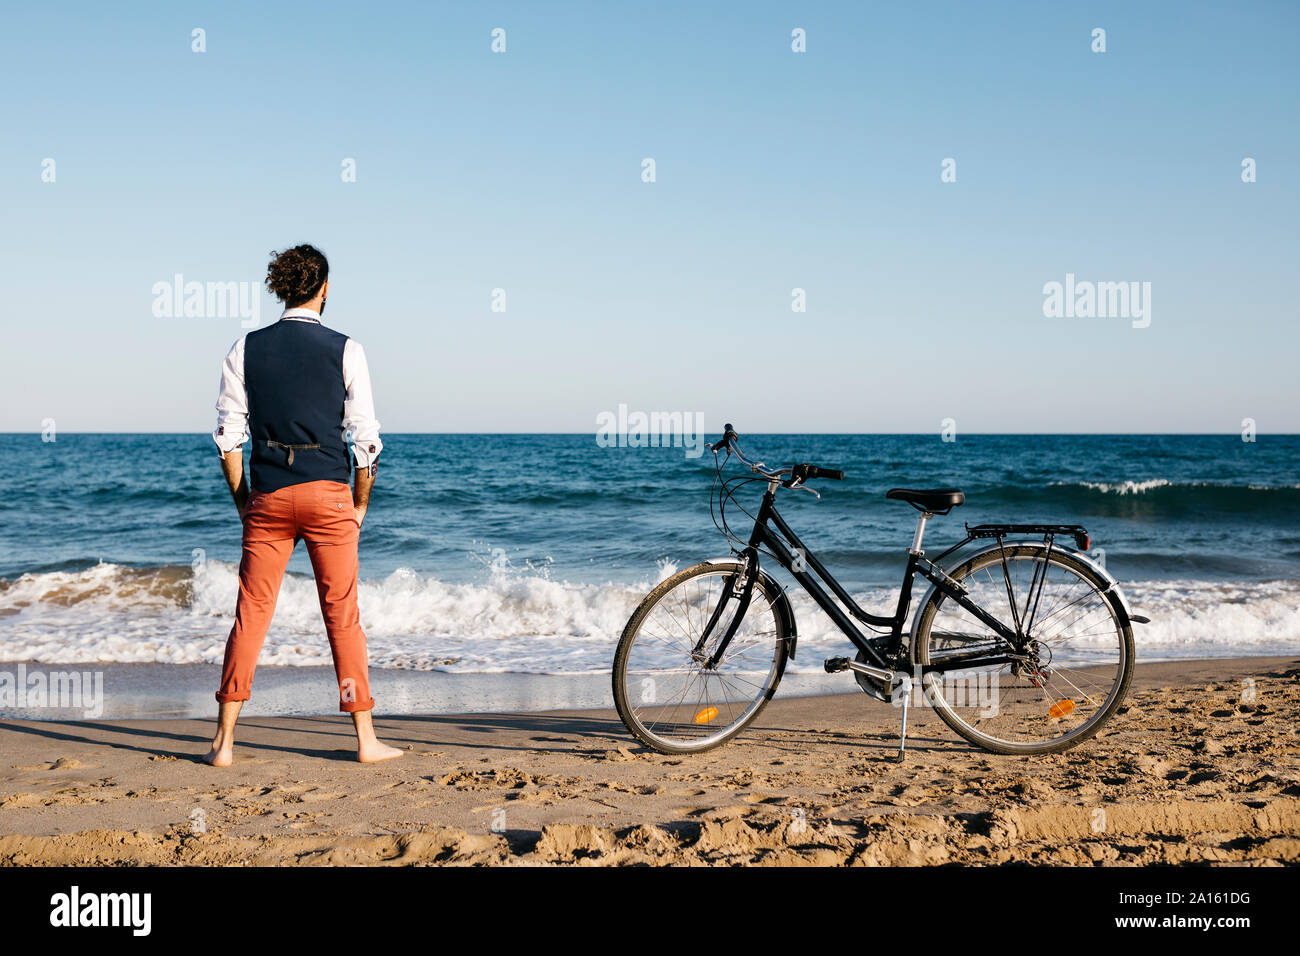 Well dressed man with his bike standing on a beach Stock Photo